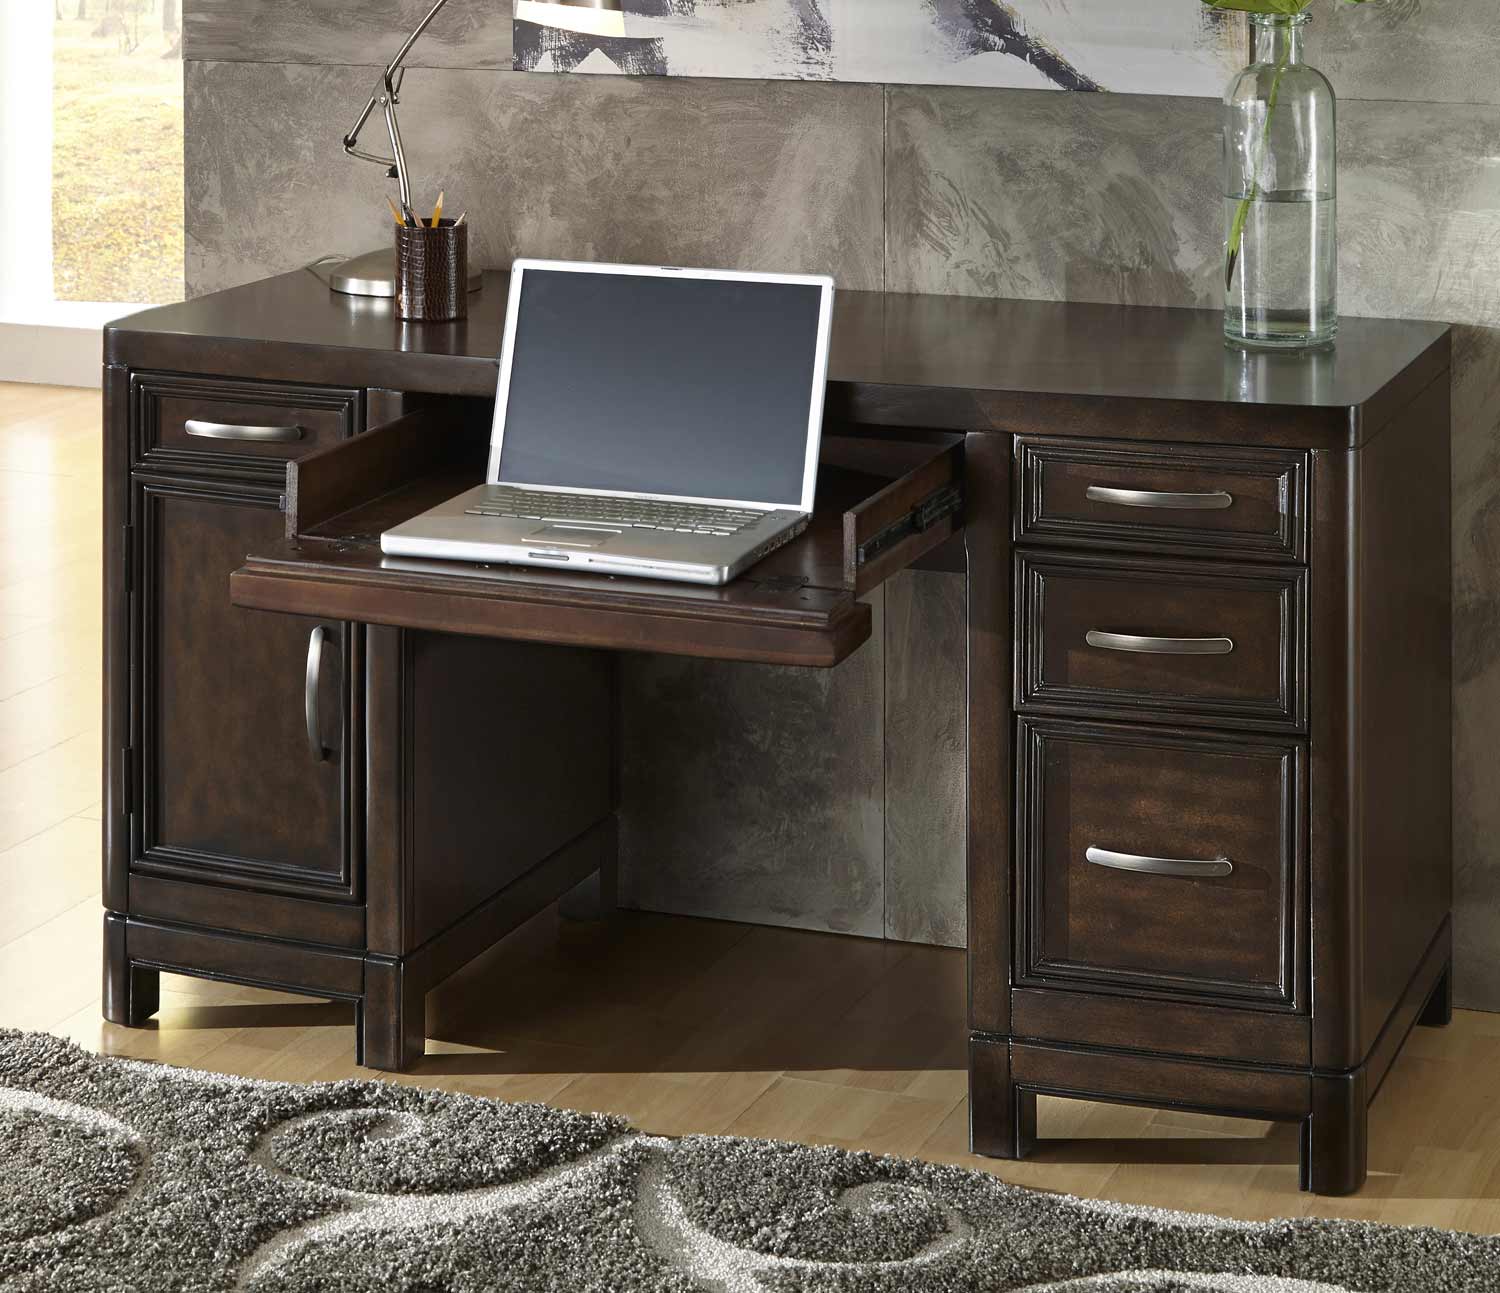 Home Styles Crescent Hill Pedestal Desk - Two-tone tortoise shell